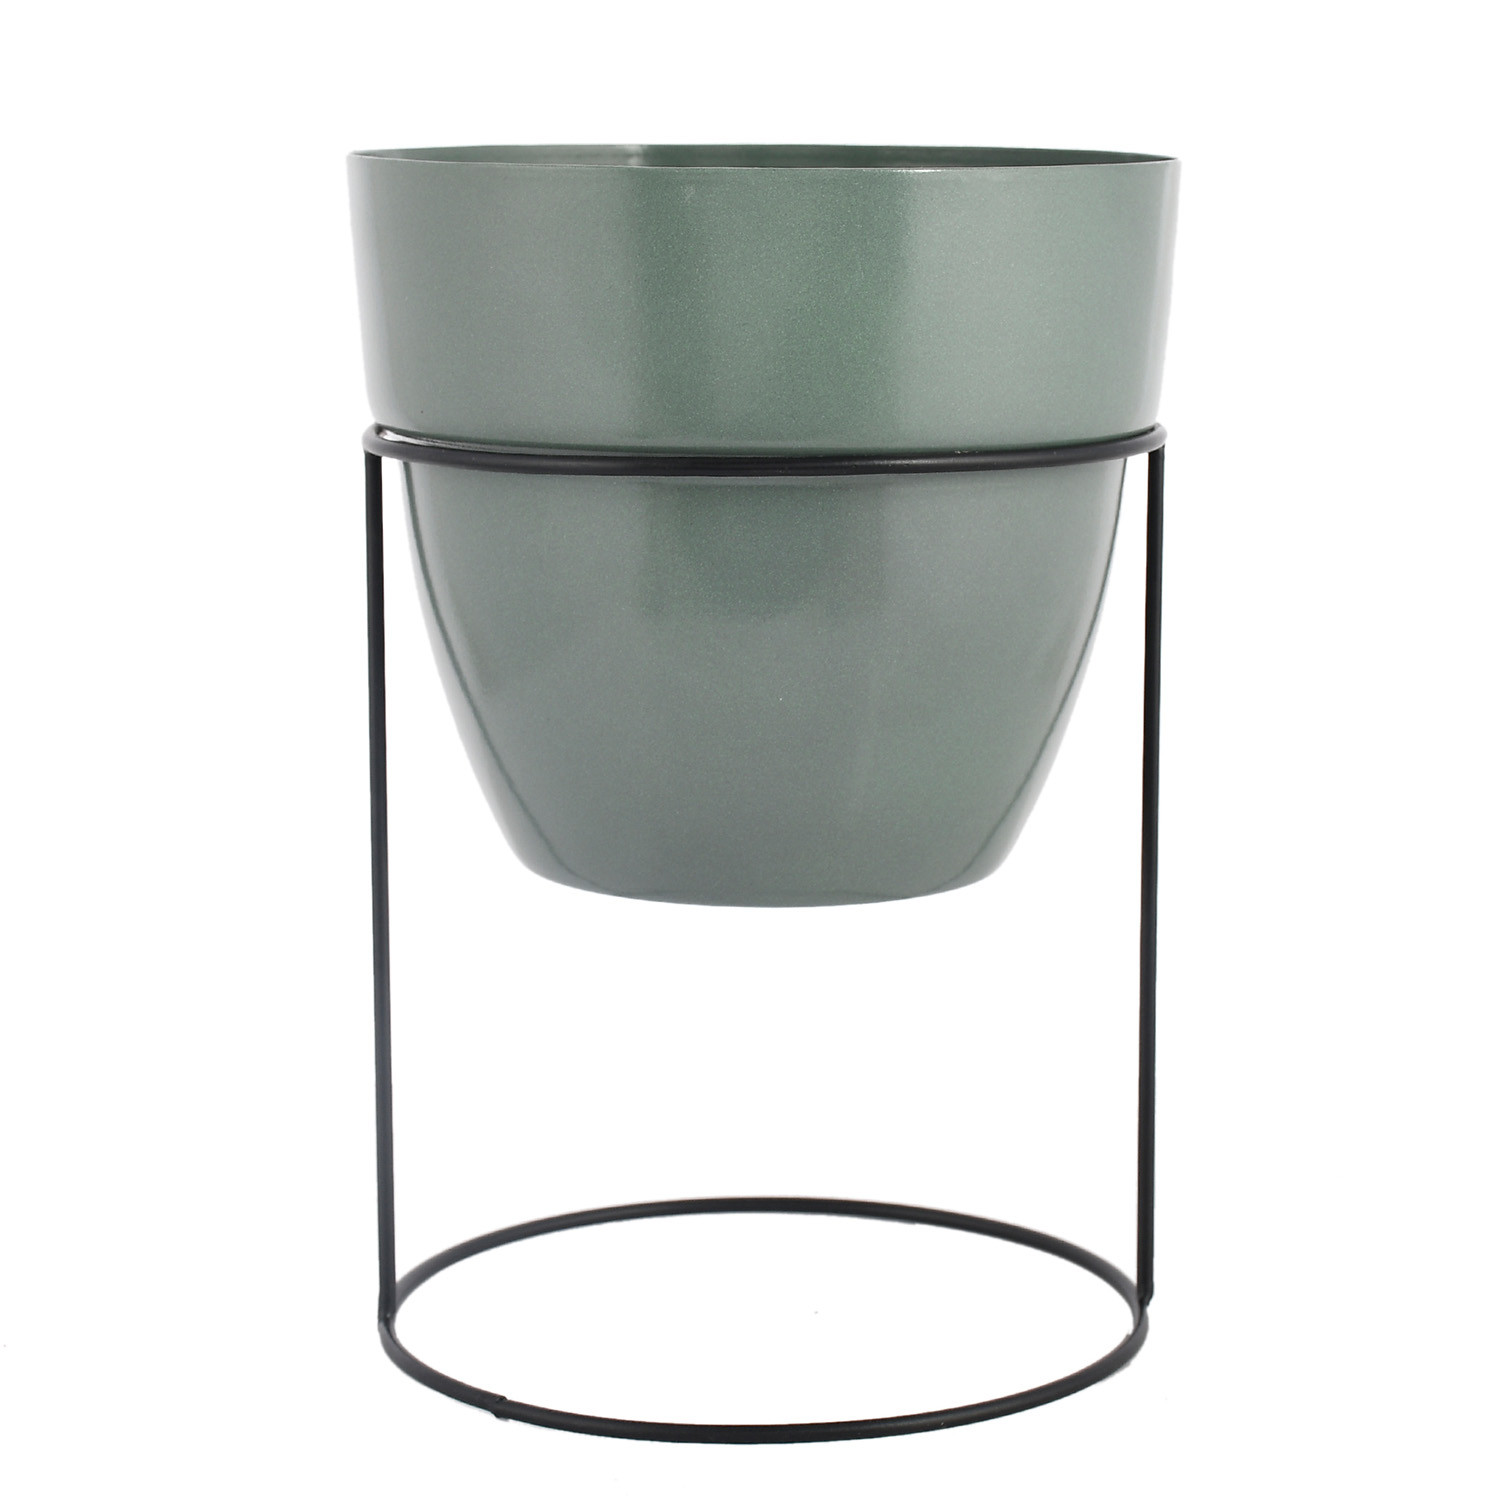 Kuber Industries Metal Planter|Decorative Modern Indoor Desk Pot|Iron Table Stand Flower Planter Pot For Home Décor,8.5 Inches,Pack of 2 (Green & Black)